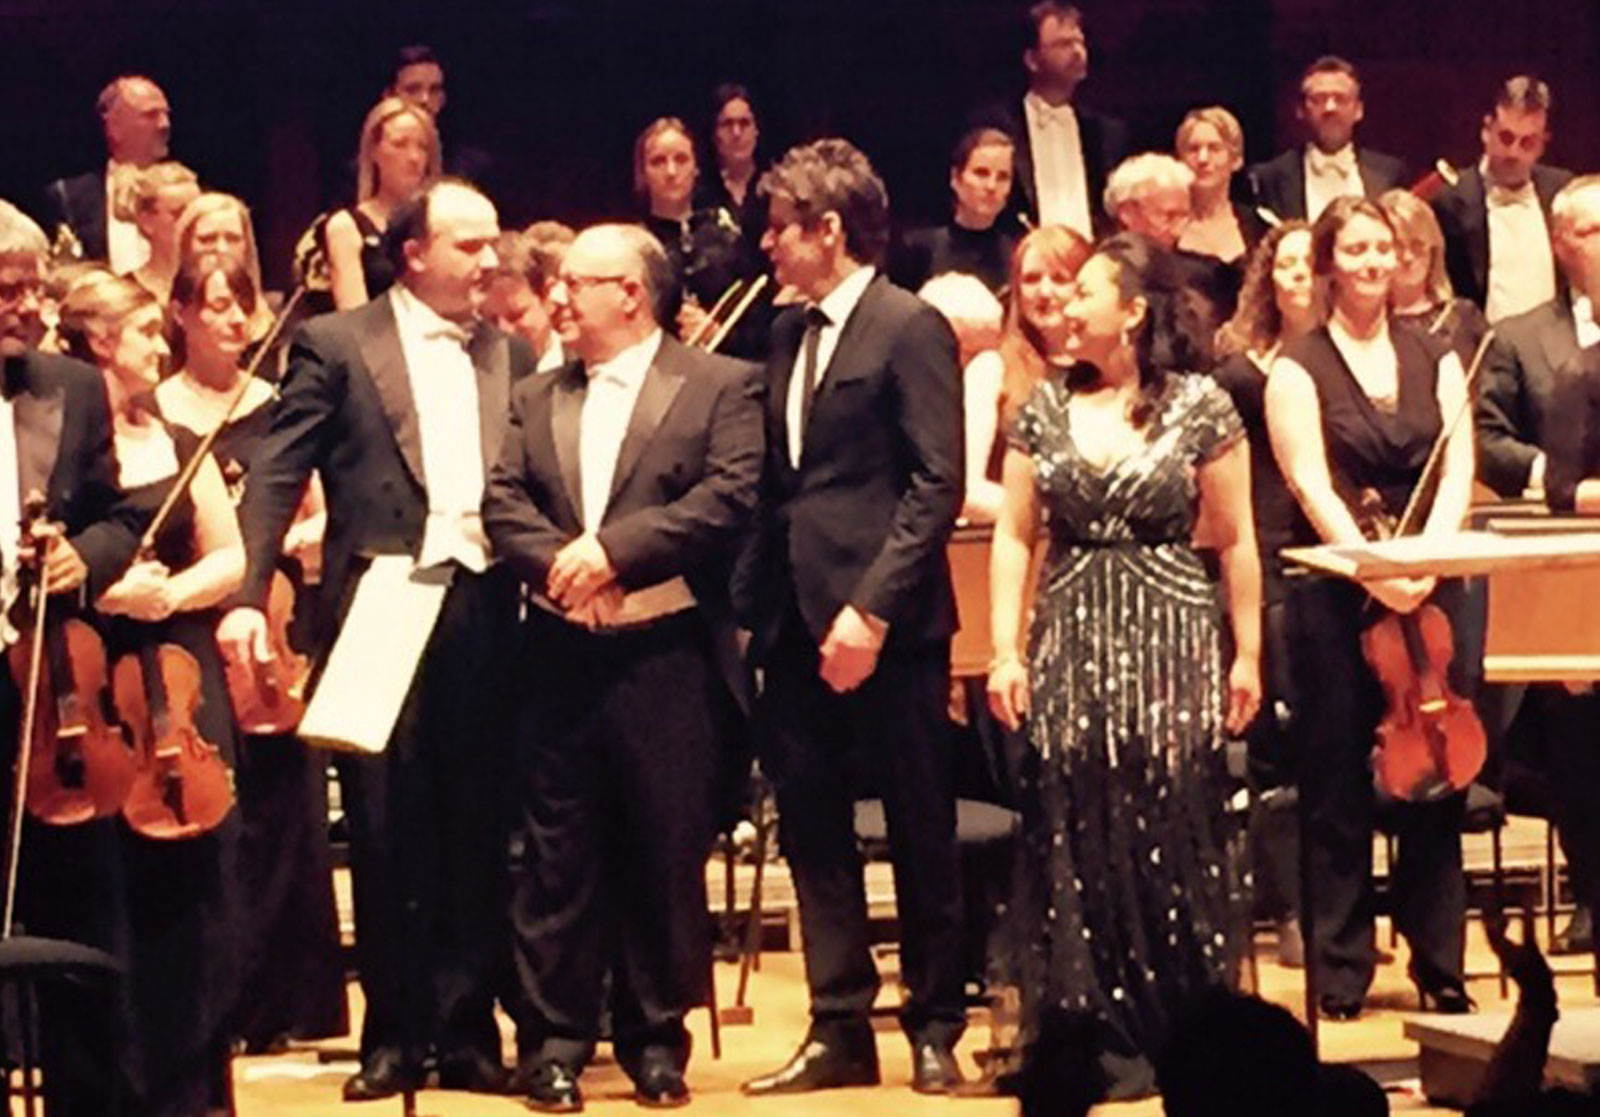 Receiving-Ovation-with-Maestro-Renato-Balsadonna,-Hye-Youn-Lee-and-Garoar-Thor-Cortes-after-Gala-Concert-with-Royal-Philharmonic-Orchestra-May-2015_GS